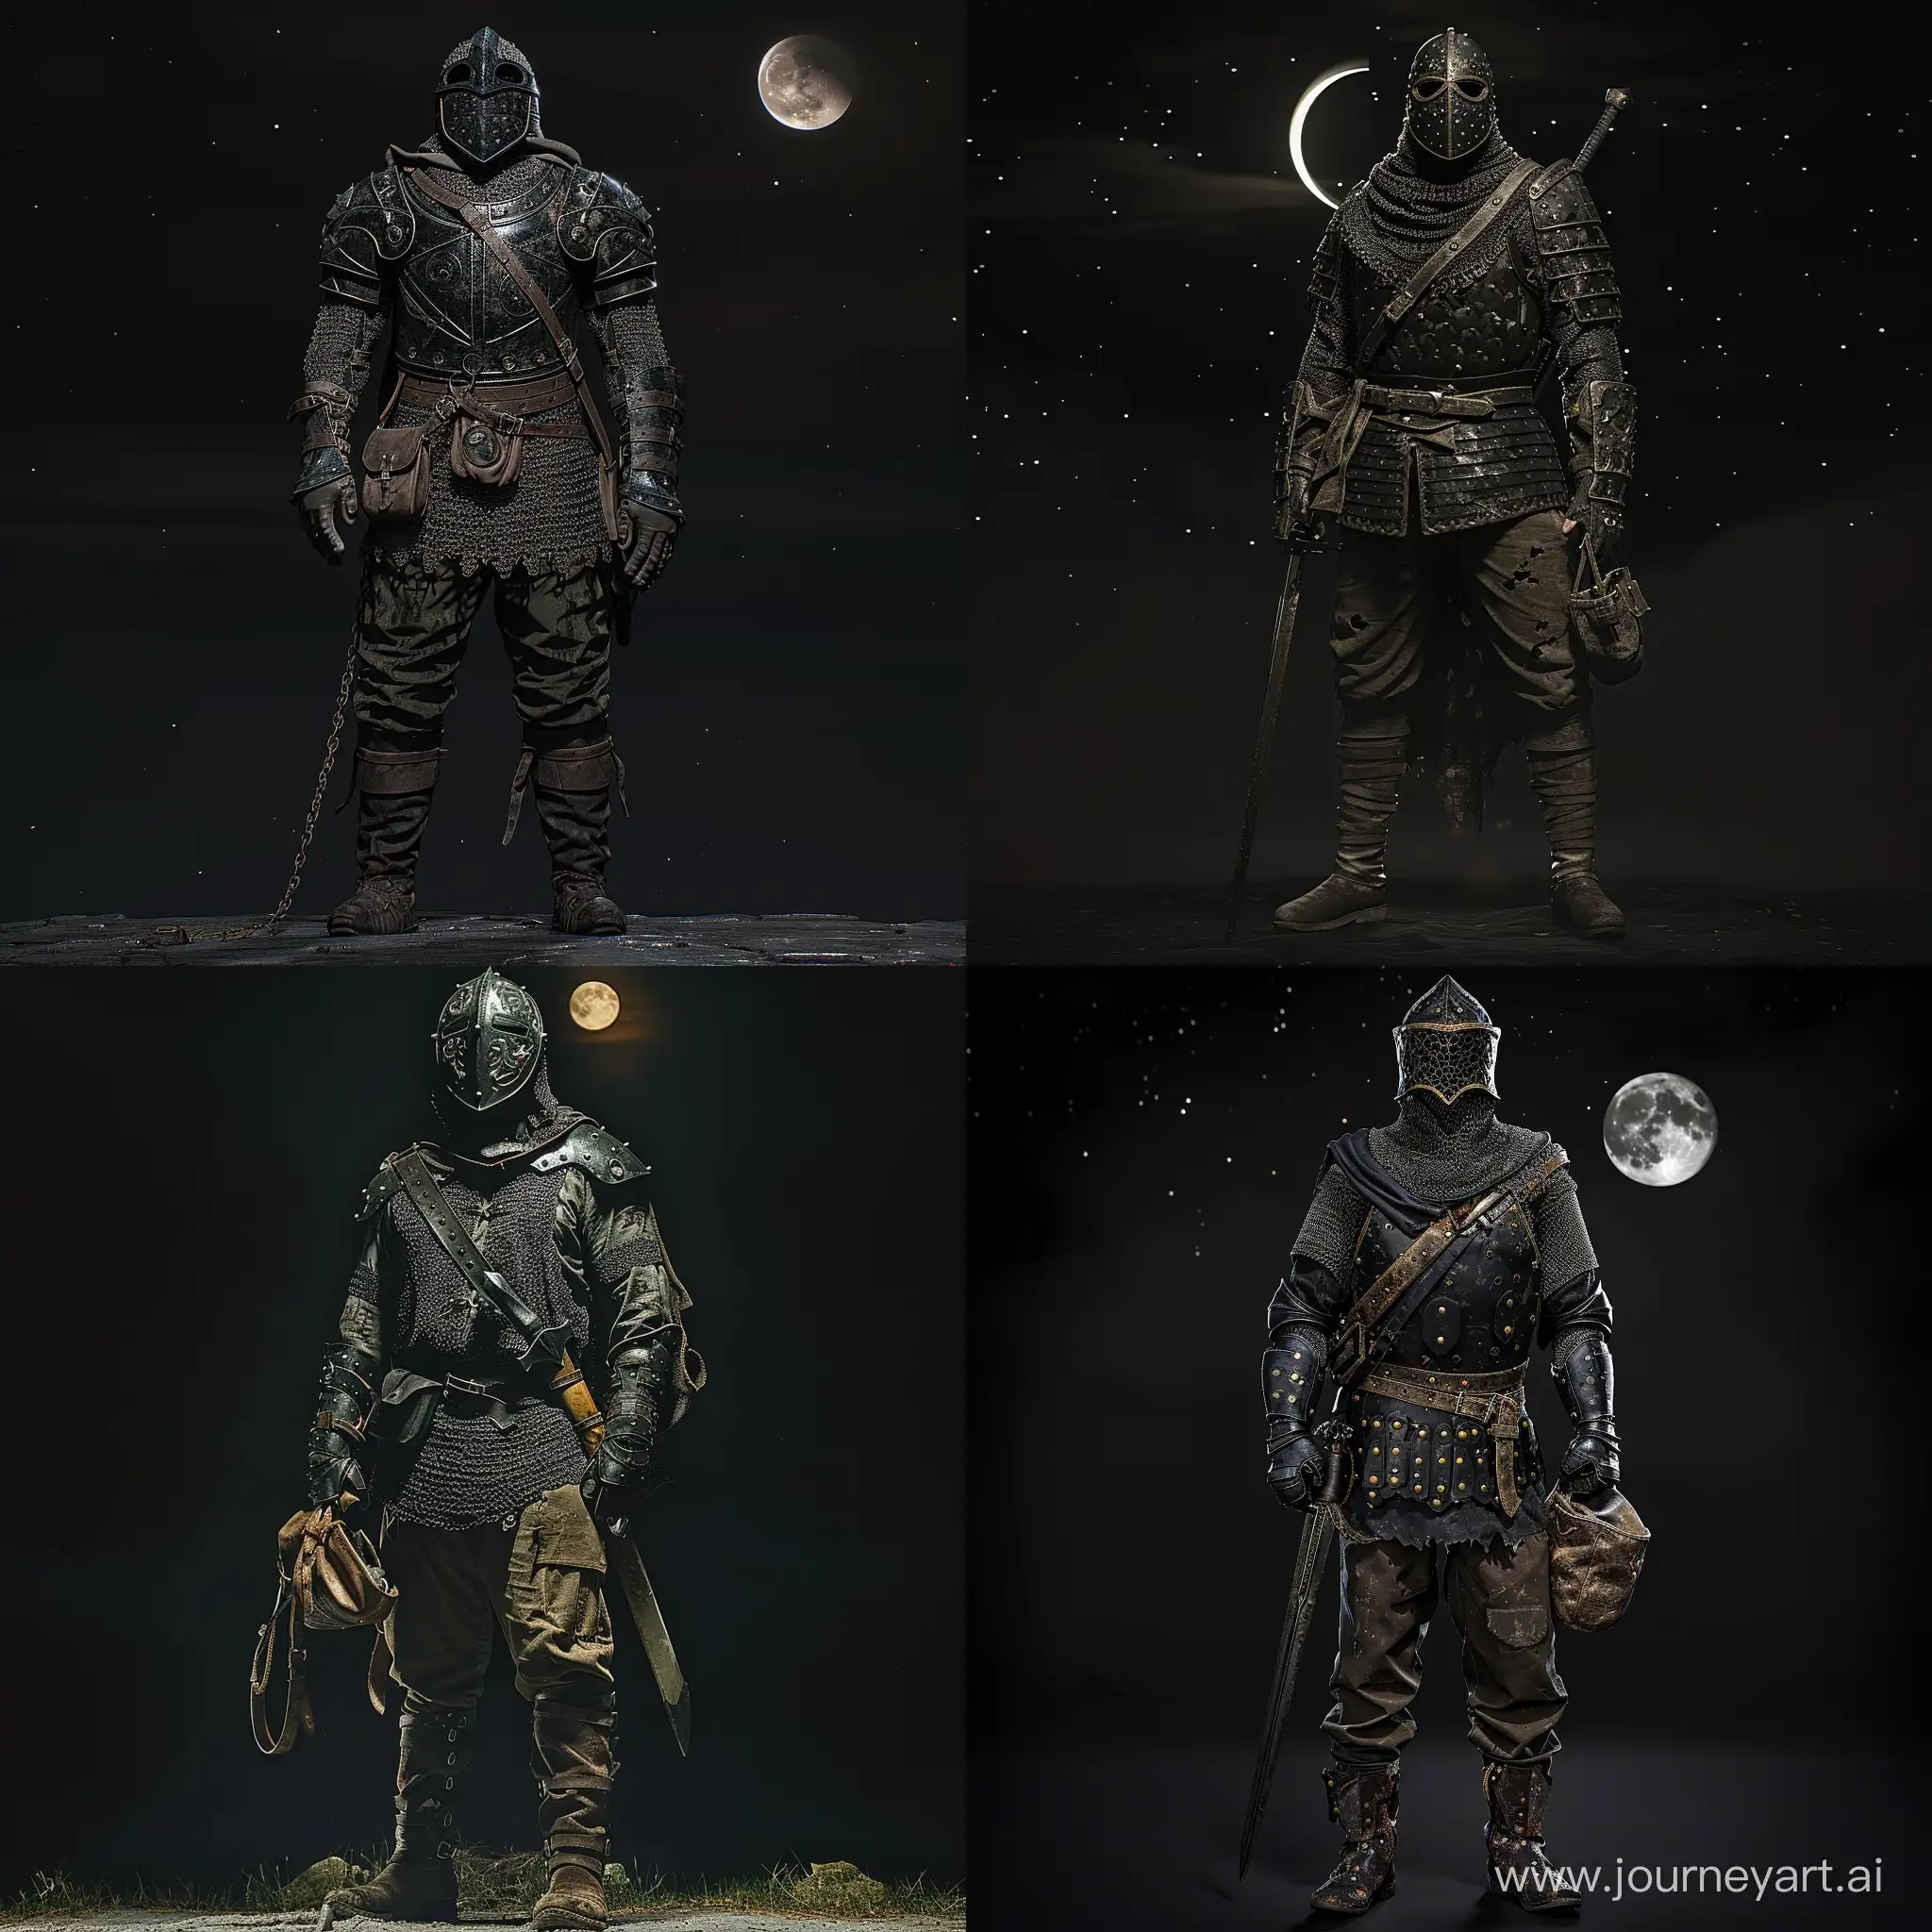 a man wearing,  a heavy, metal-plated armor set in dark tones like black or charcoal, Layered over a chainmail shirt or gambeson for added protection, Pair with fitted trousers in a muted color like dark brown or olive green, Choose sturdy leather boots with metal reinforcements and thick soles, Accessorized with a helm featuring a faceplate or visor, gauntlets adorned with intricate designs, and a broadsword strapped to your back, Carrying a leather pouch, standing under the moonlight ,1970's grimdark fantasy style, gritty, dark, vintage, detailed